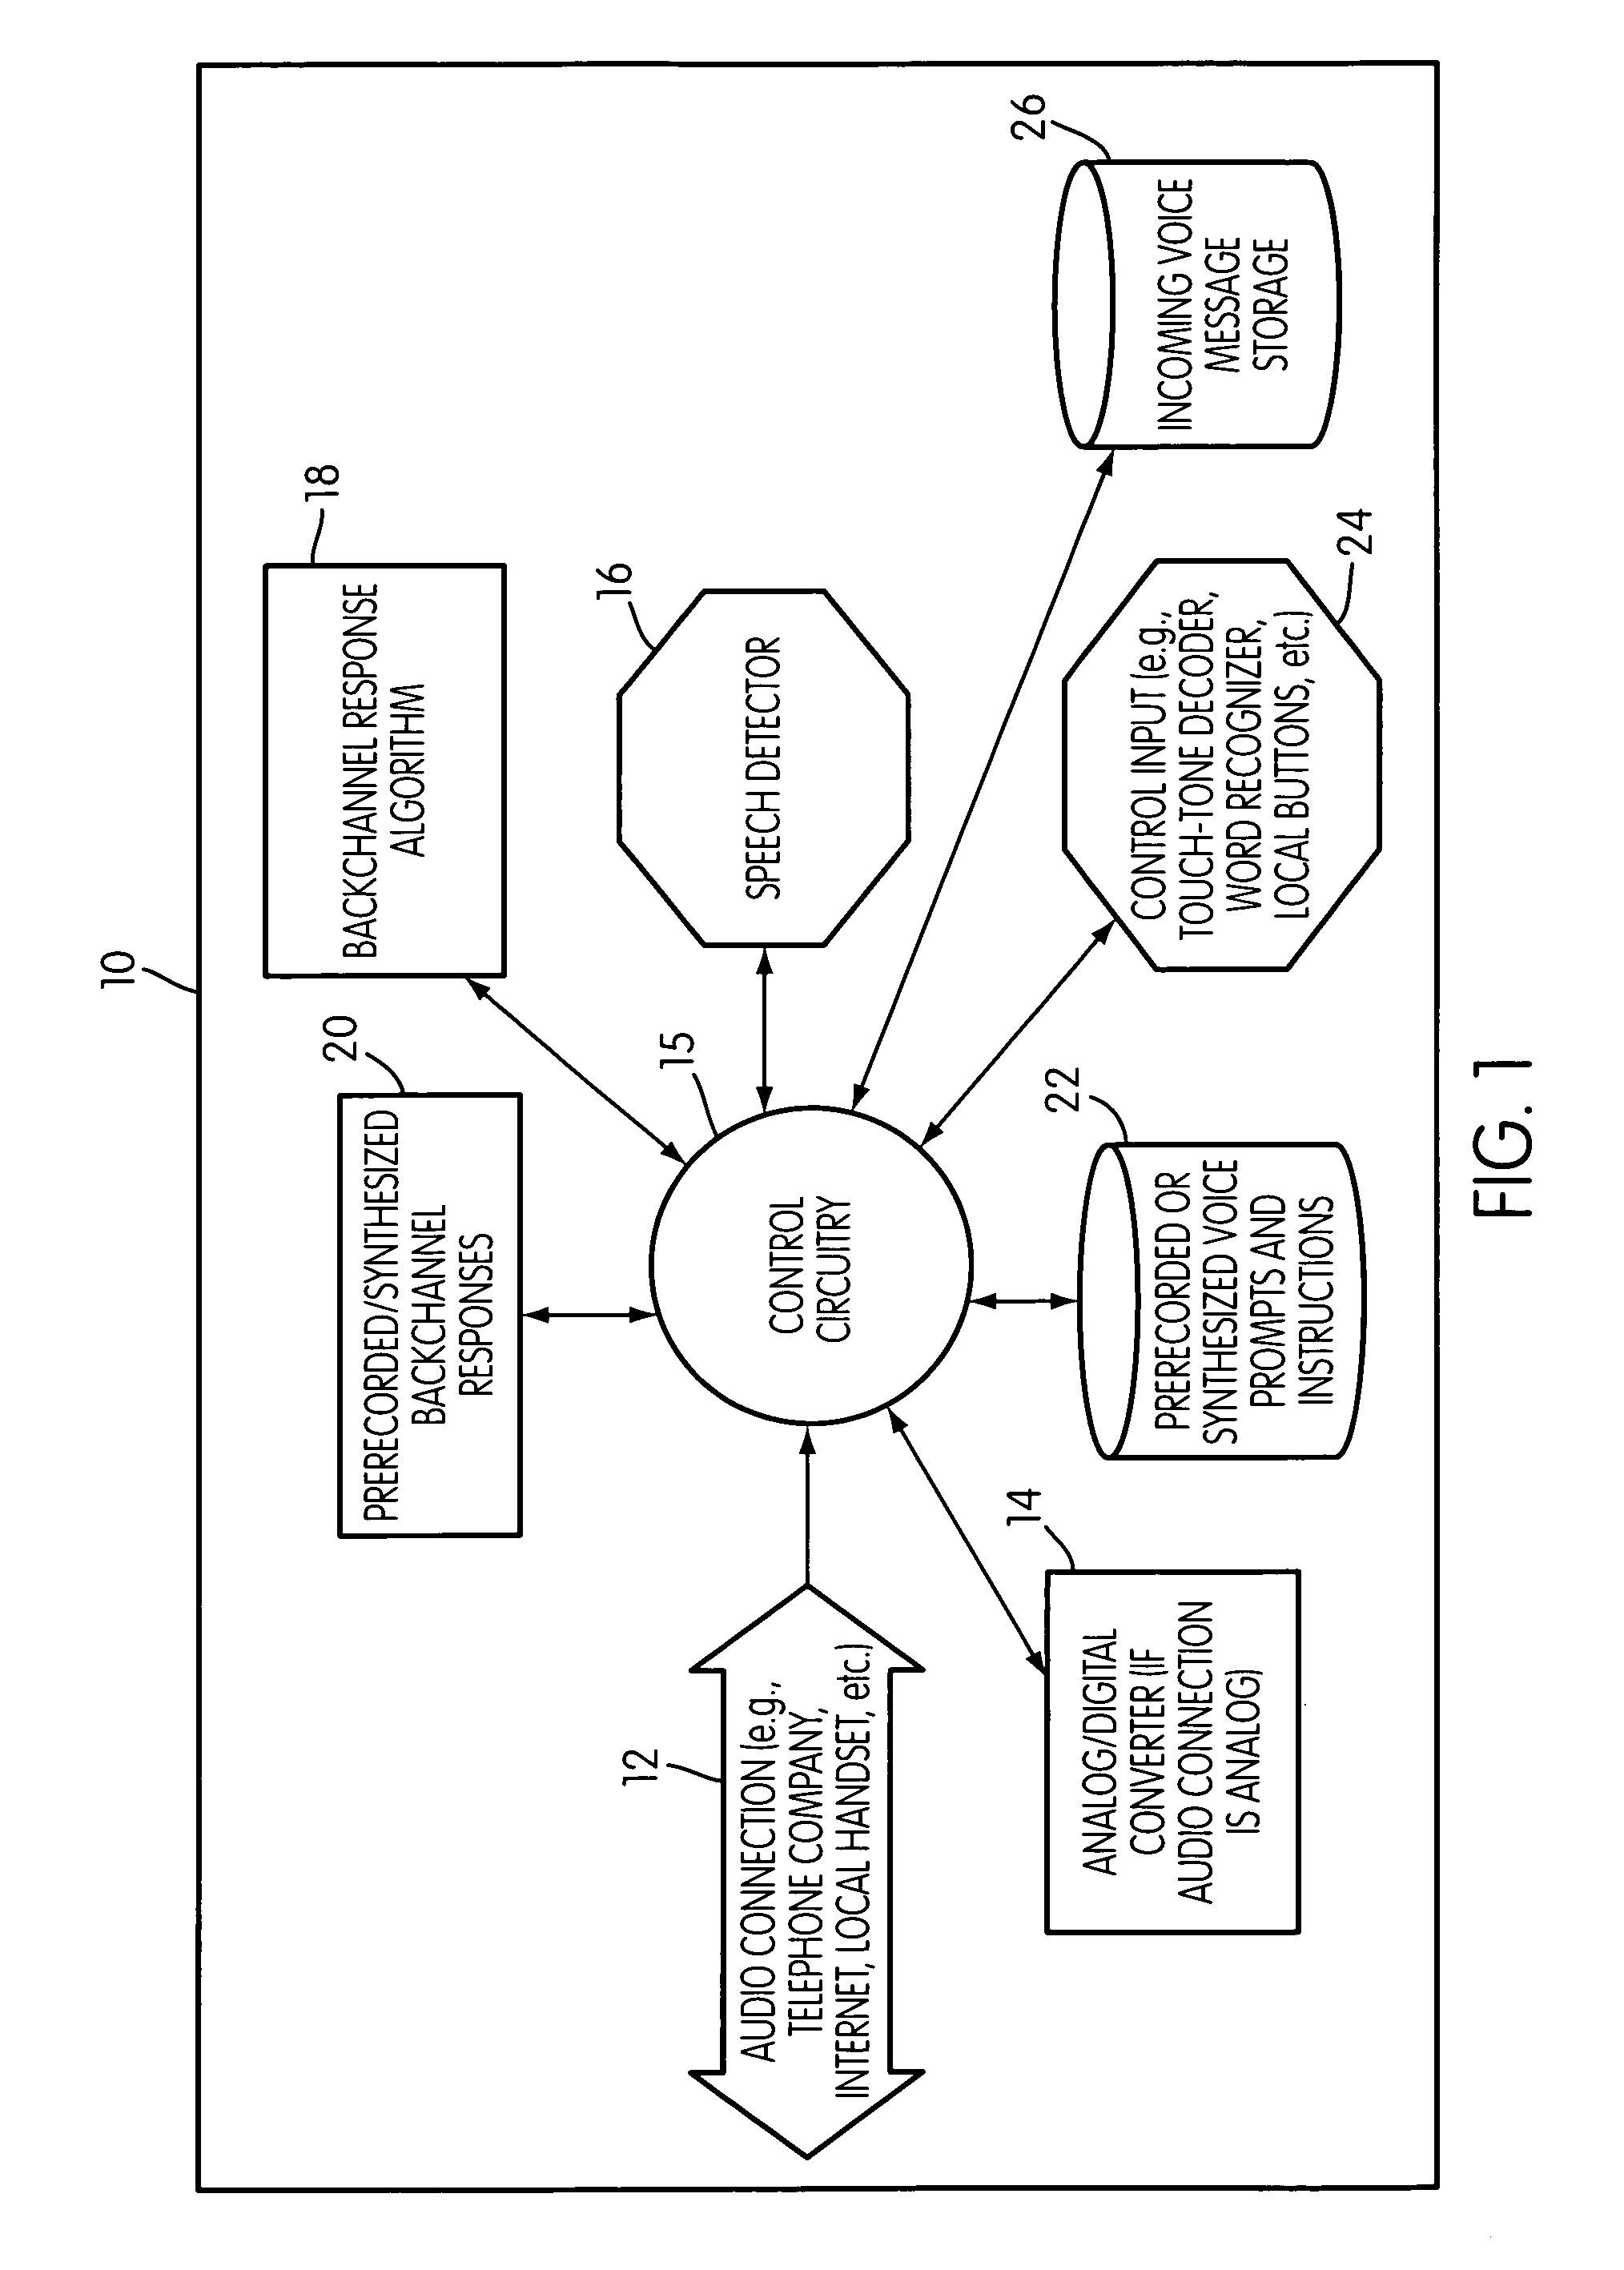 Method and system for providing automated audible backchannel responses